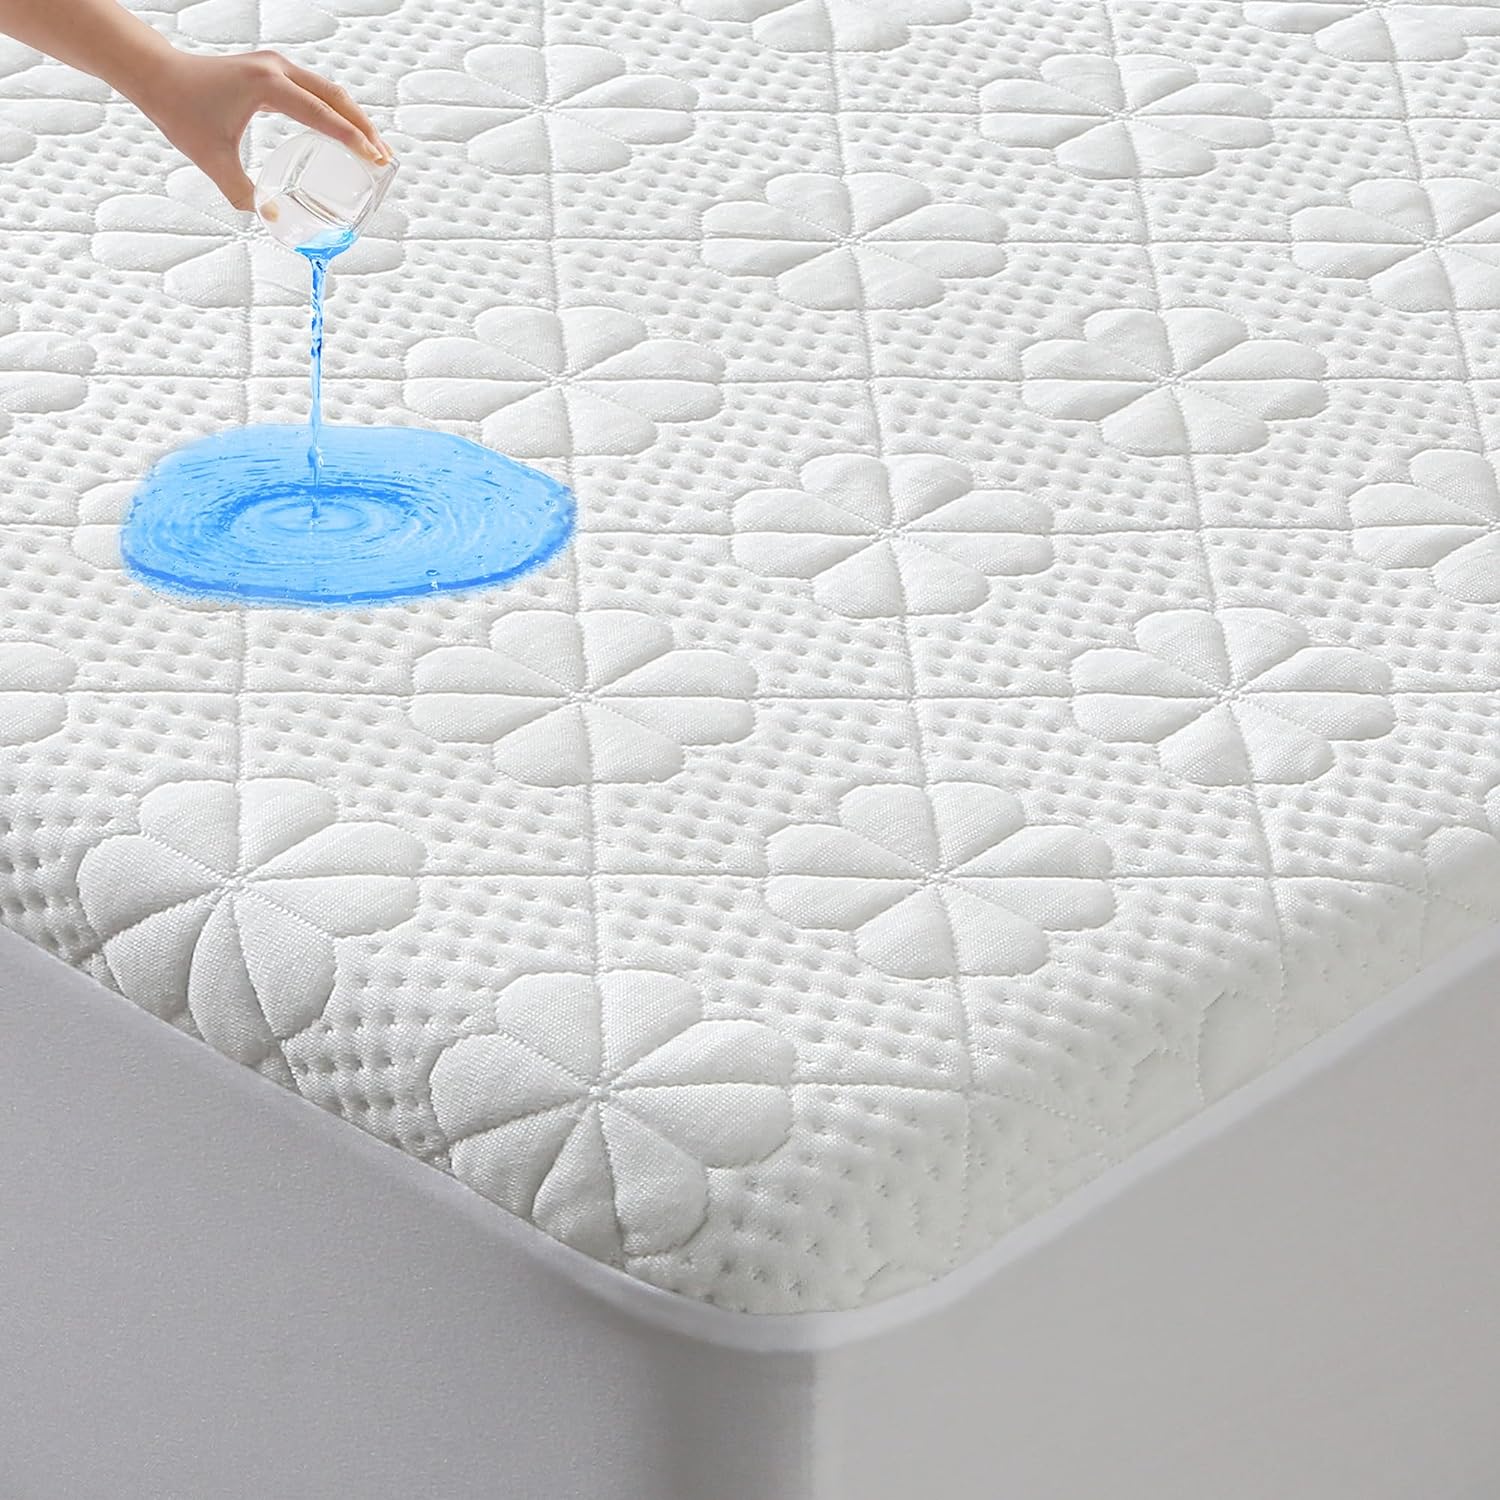 GOONIK Full Size Waterproof Mattress Protector, Cooling Bamboo Viscose Mattress Pad Cover for Full Size Bed, Super Soft Full Size Mattress Cover for 6-16 inches Mattress, White